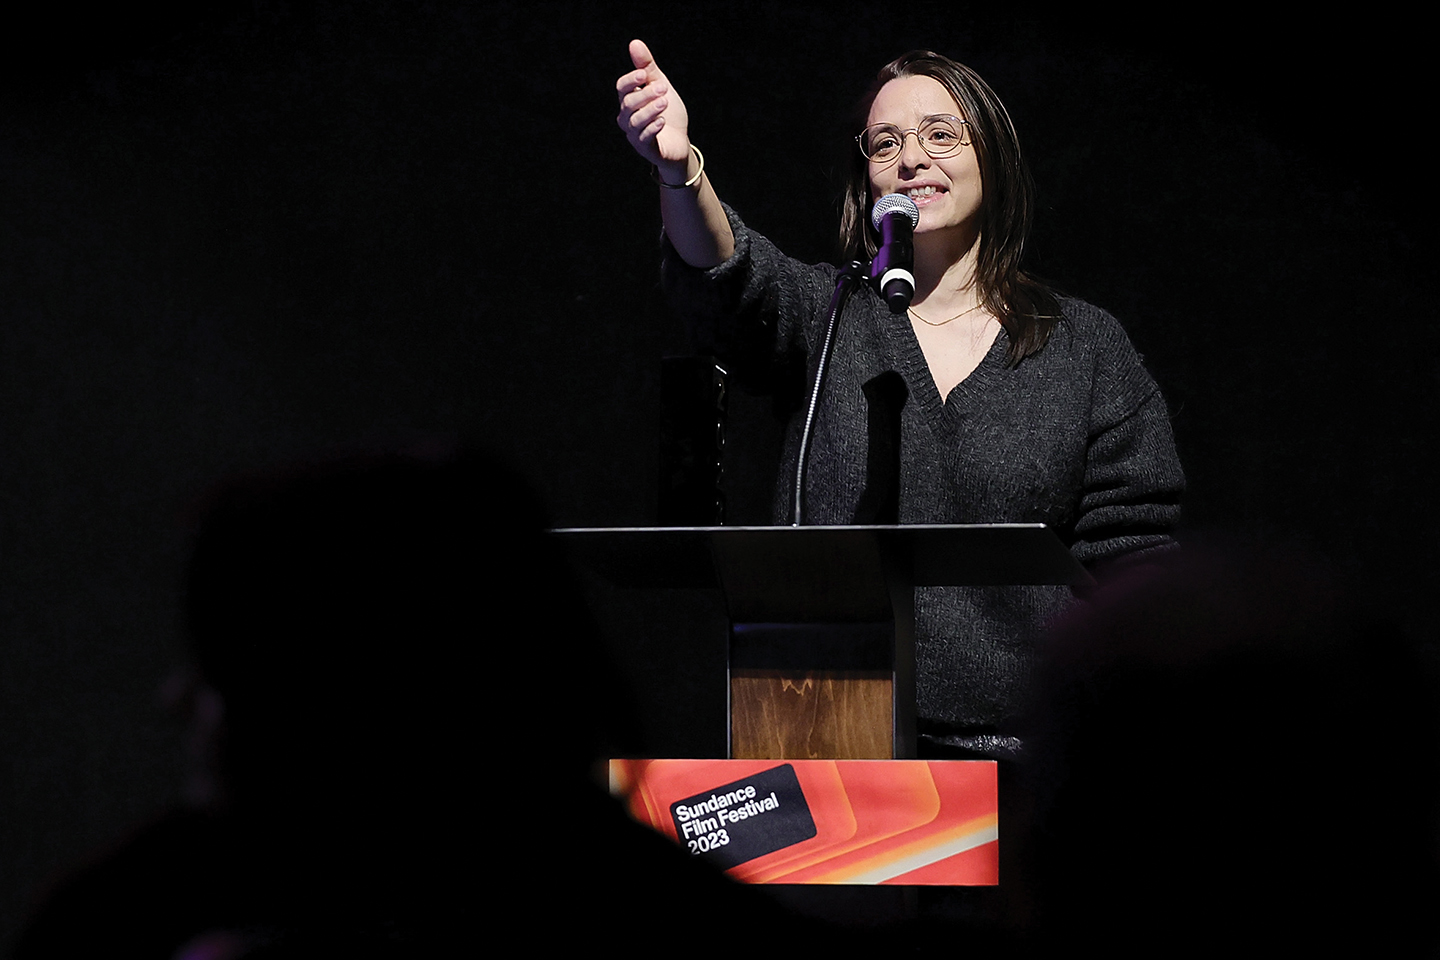 A woman wearing glasses speaks at a podium and raises her hand toward the audience, a placard on the podium reads Sundance Film Festival 2023